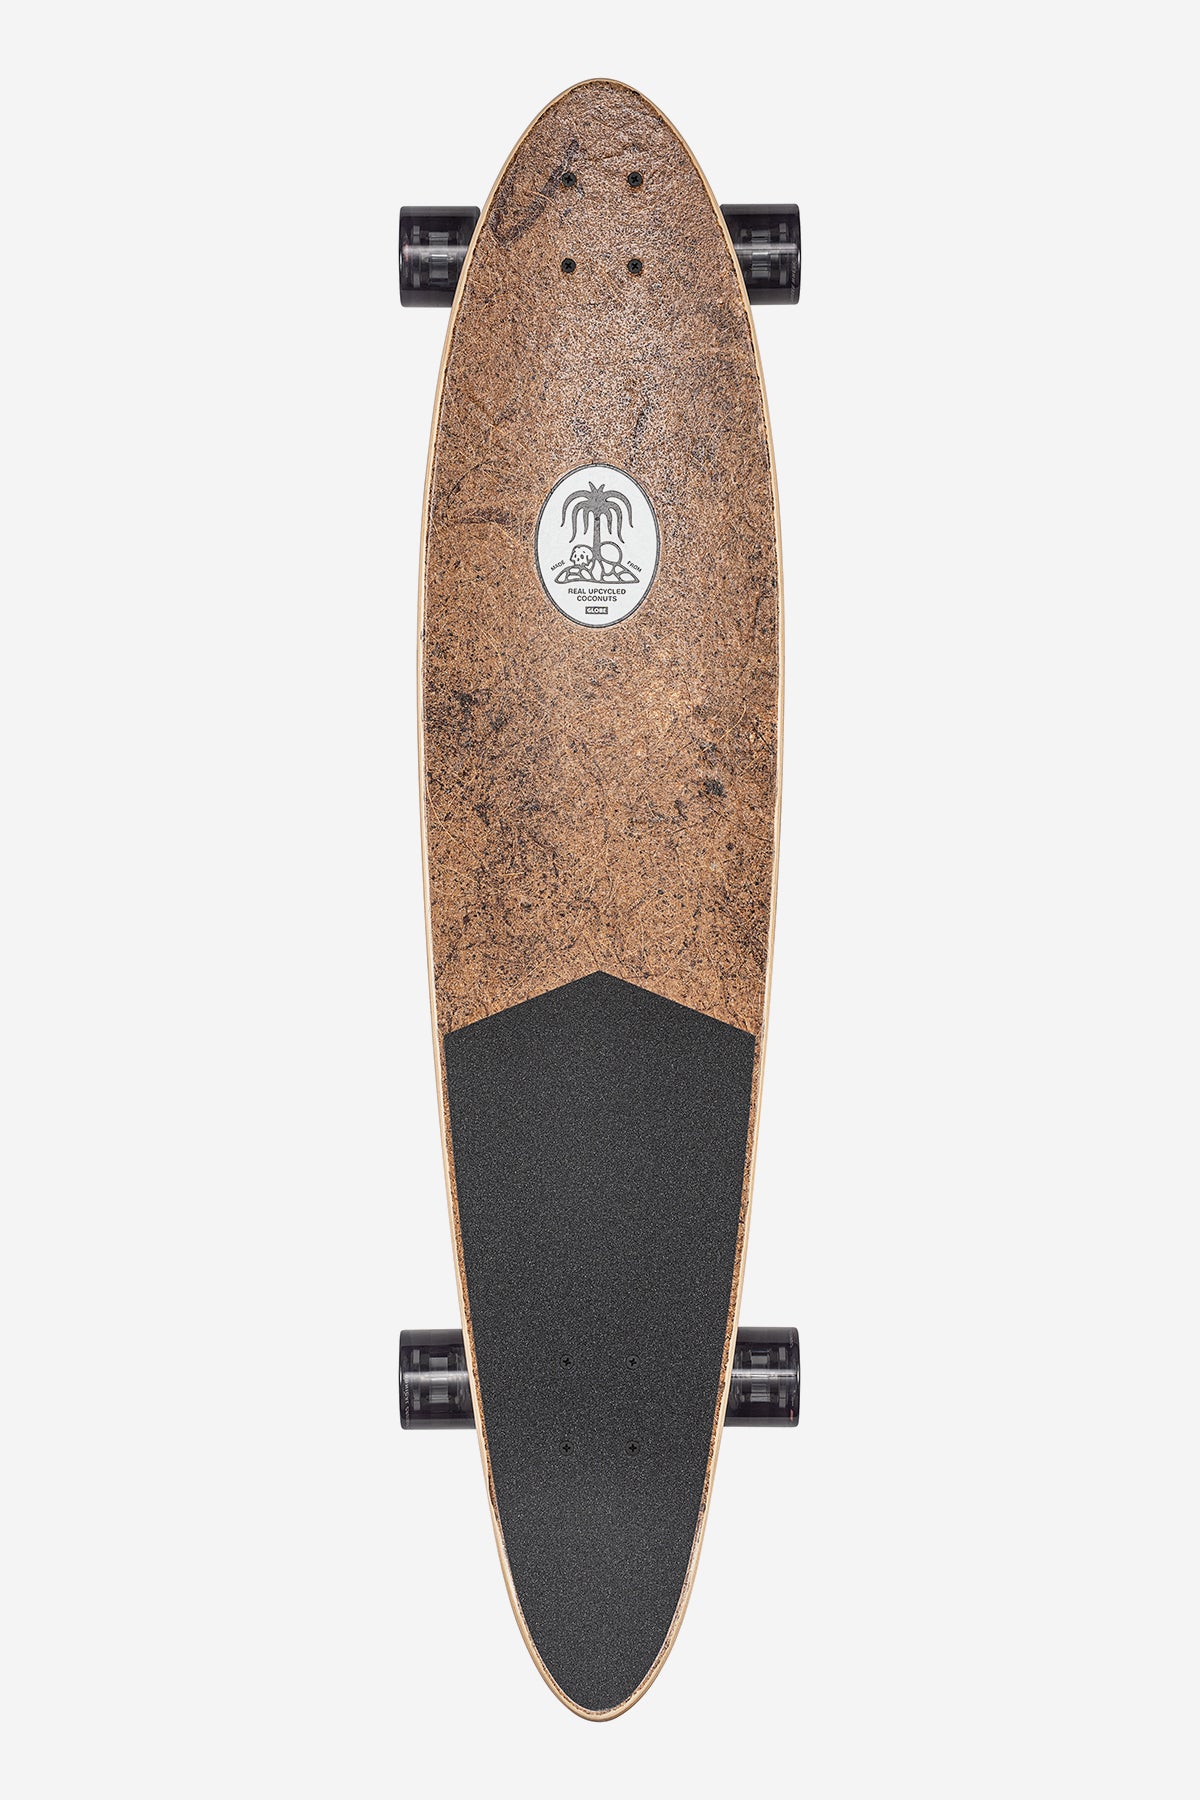 Top view of the Pinner Classic 40" Longboard